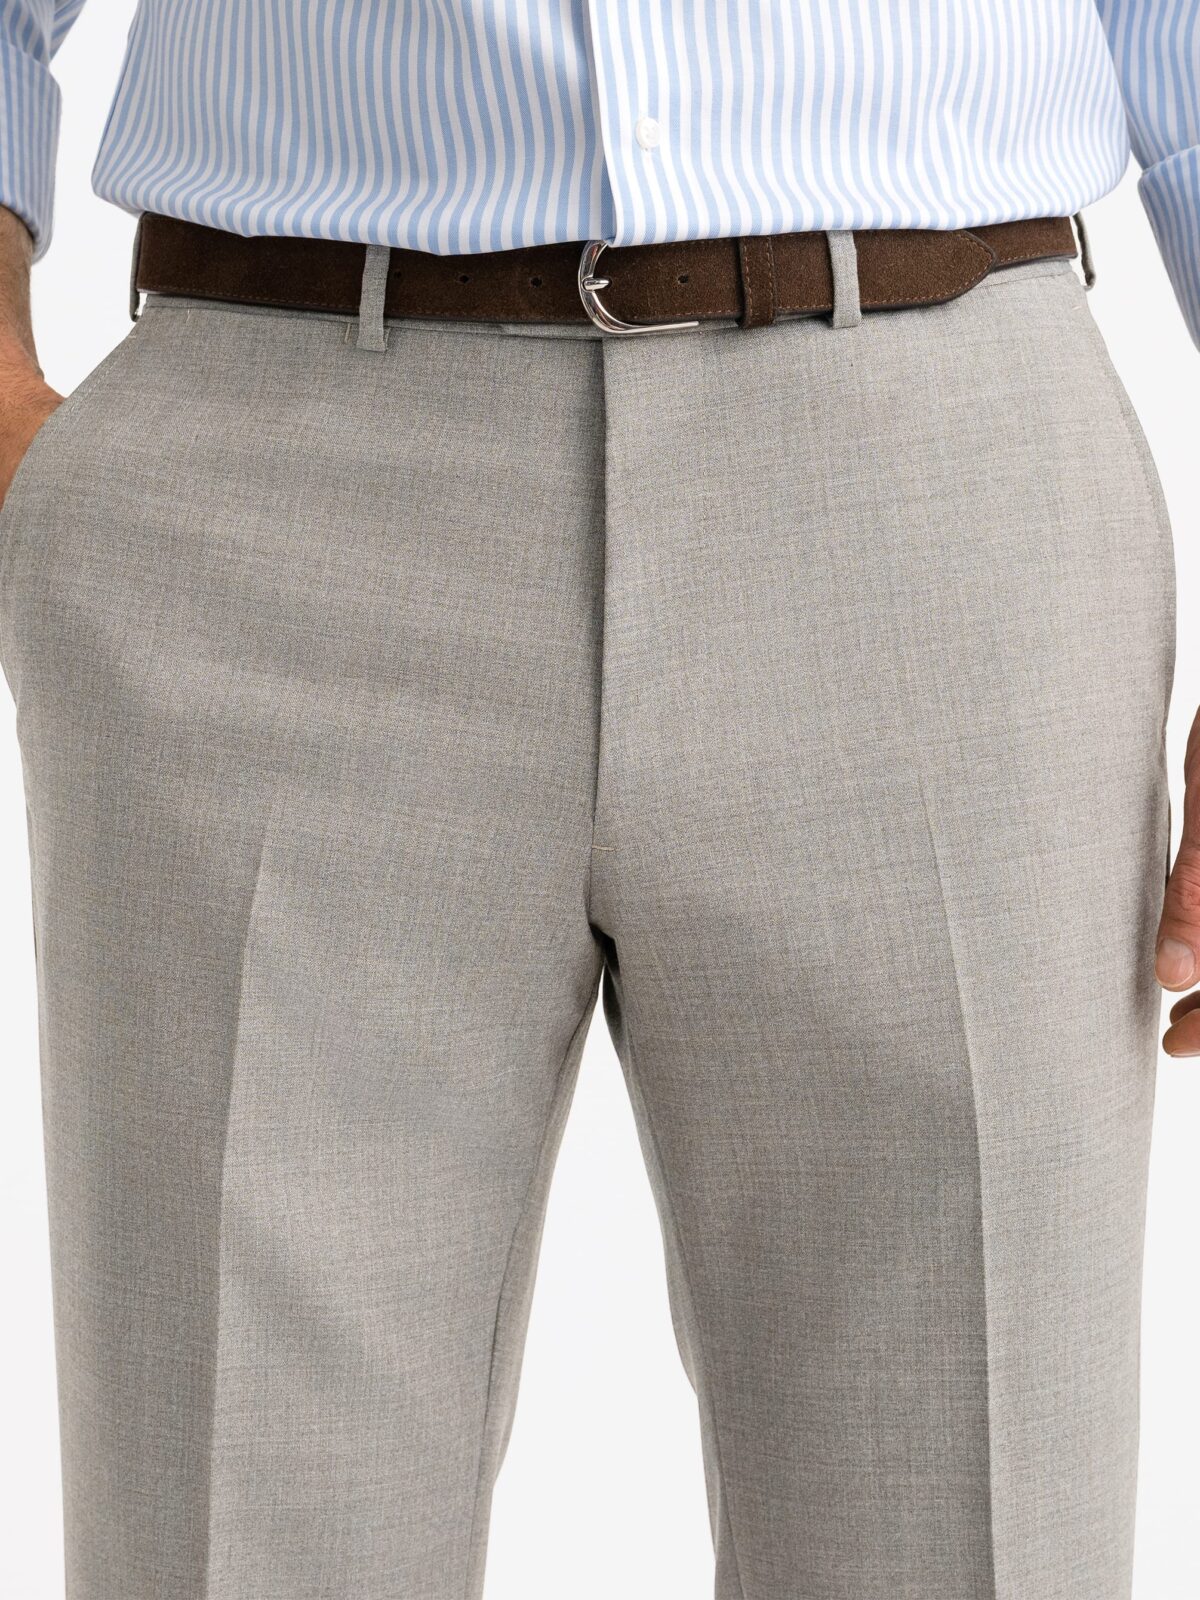 Drago Taupe S130s Tropical Wool Dress Pant - Custom Fit Tailored 